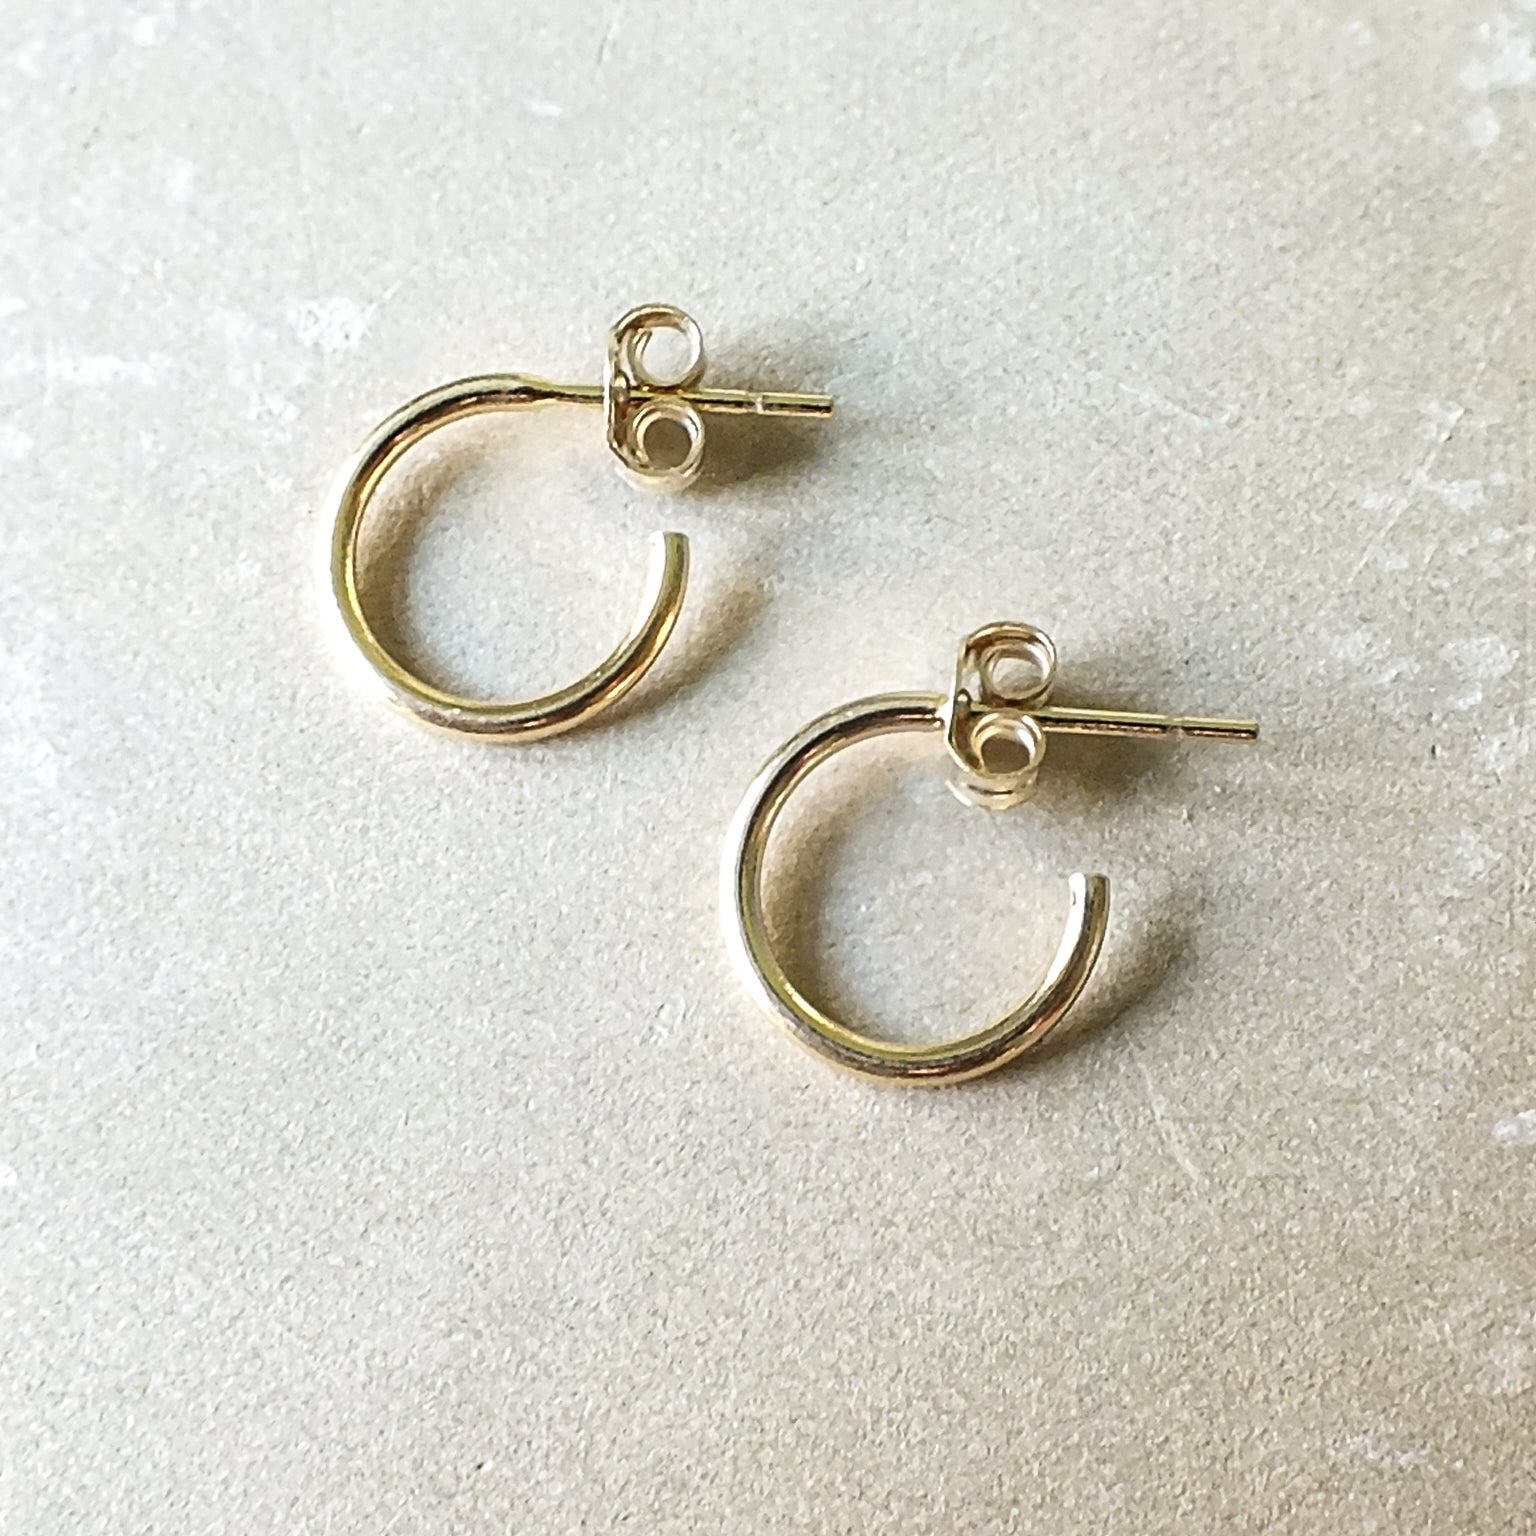 Dainty gold Open Hoop Earrings, small by Becoming Jewelry lying on a textured surface.